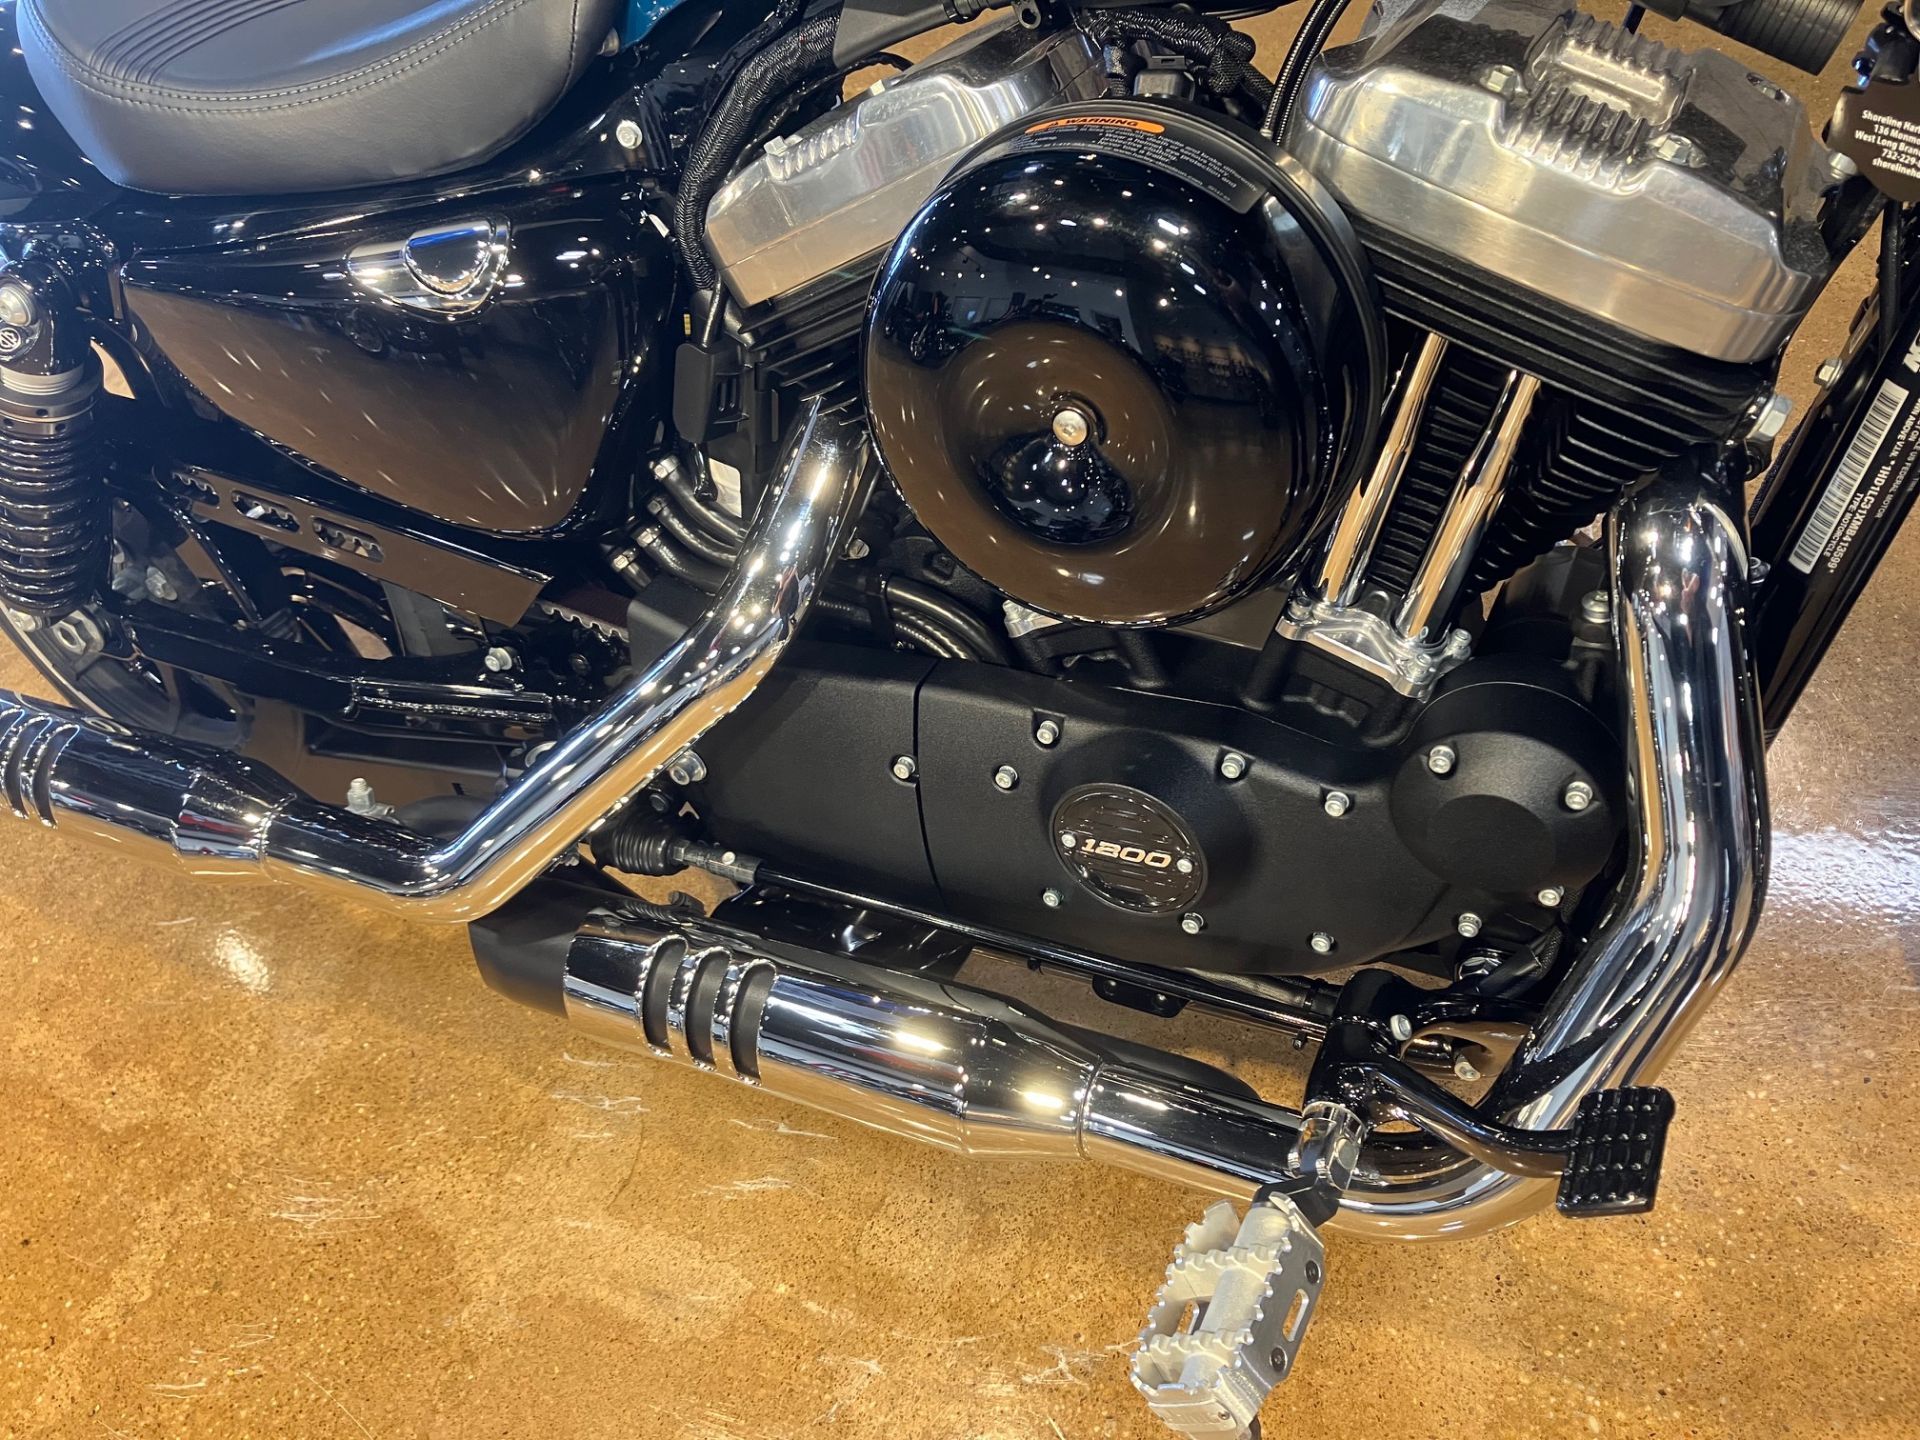 2021 Harley-Davidson FORTY-EIGHT in West Long Branch, New Jersey - Photo 22